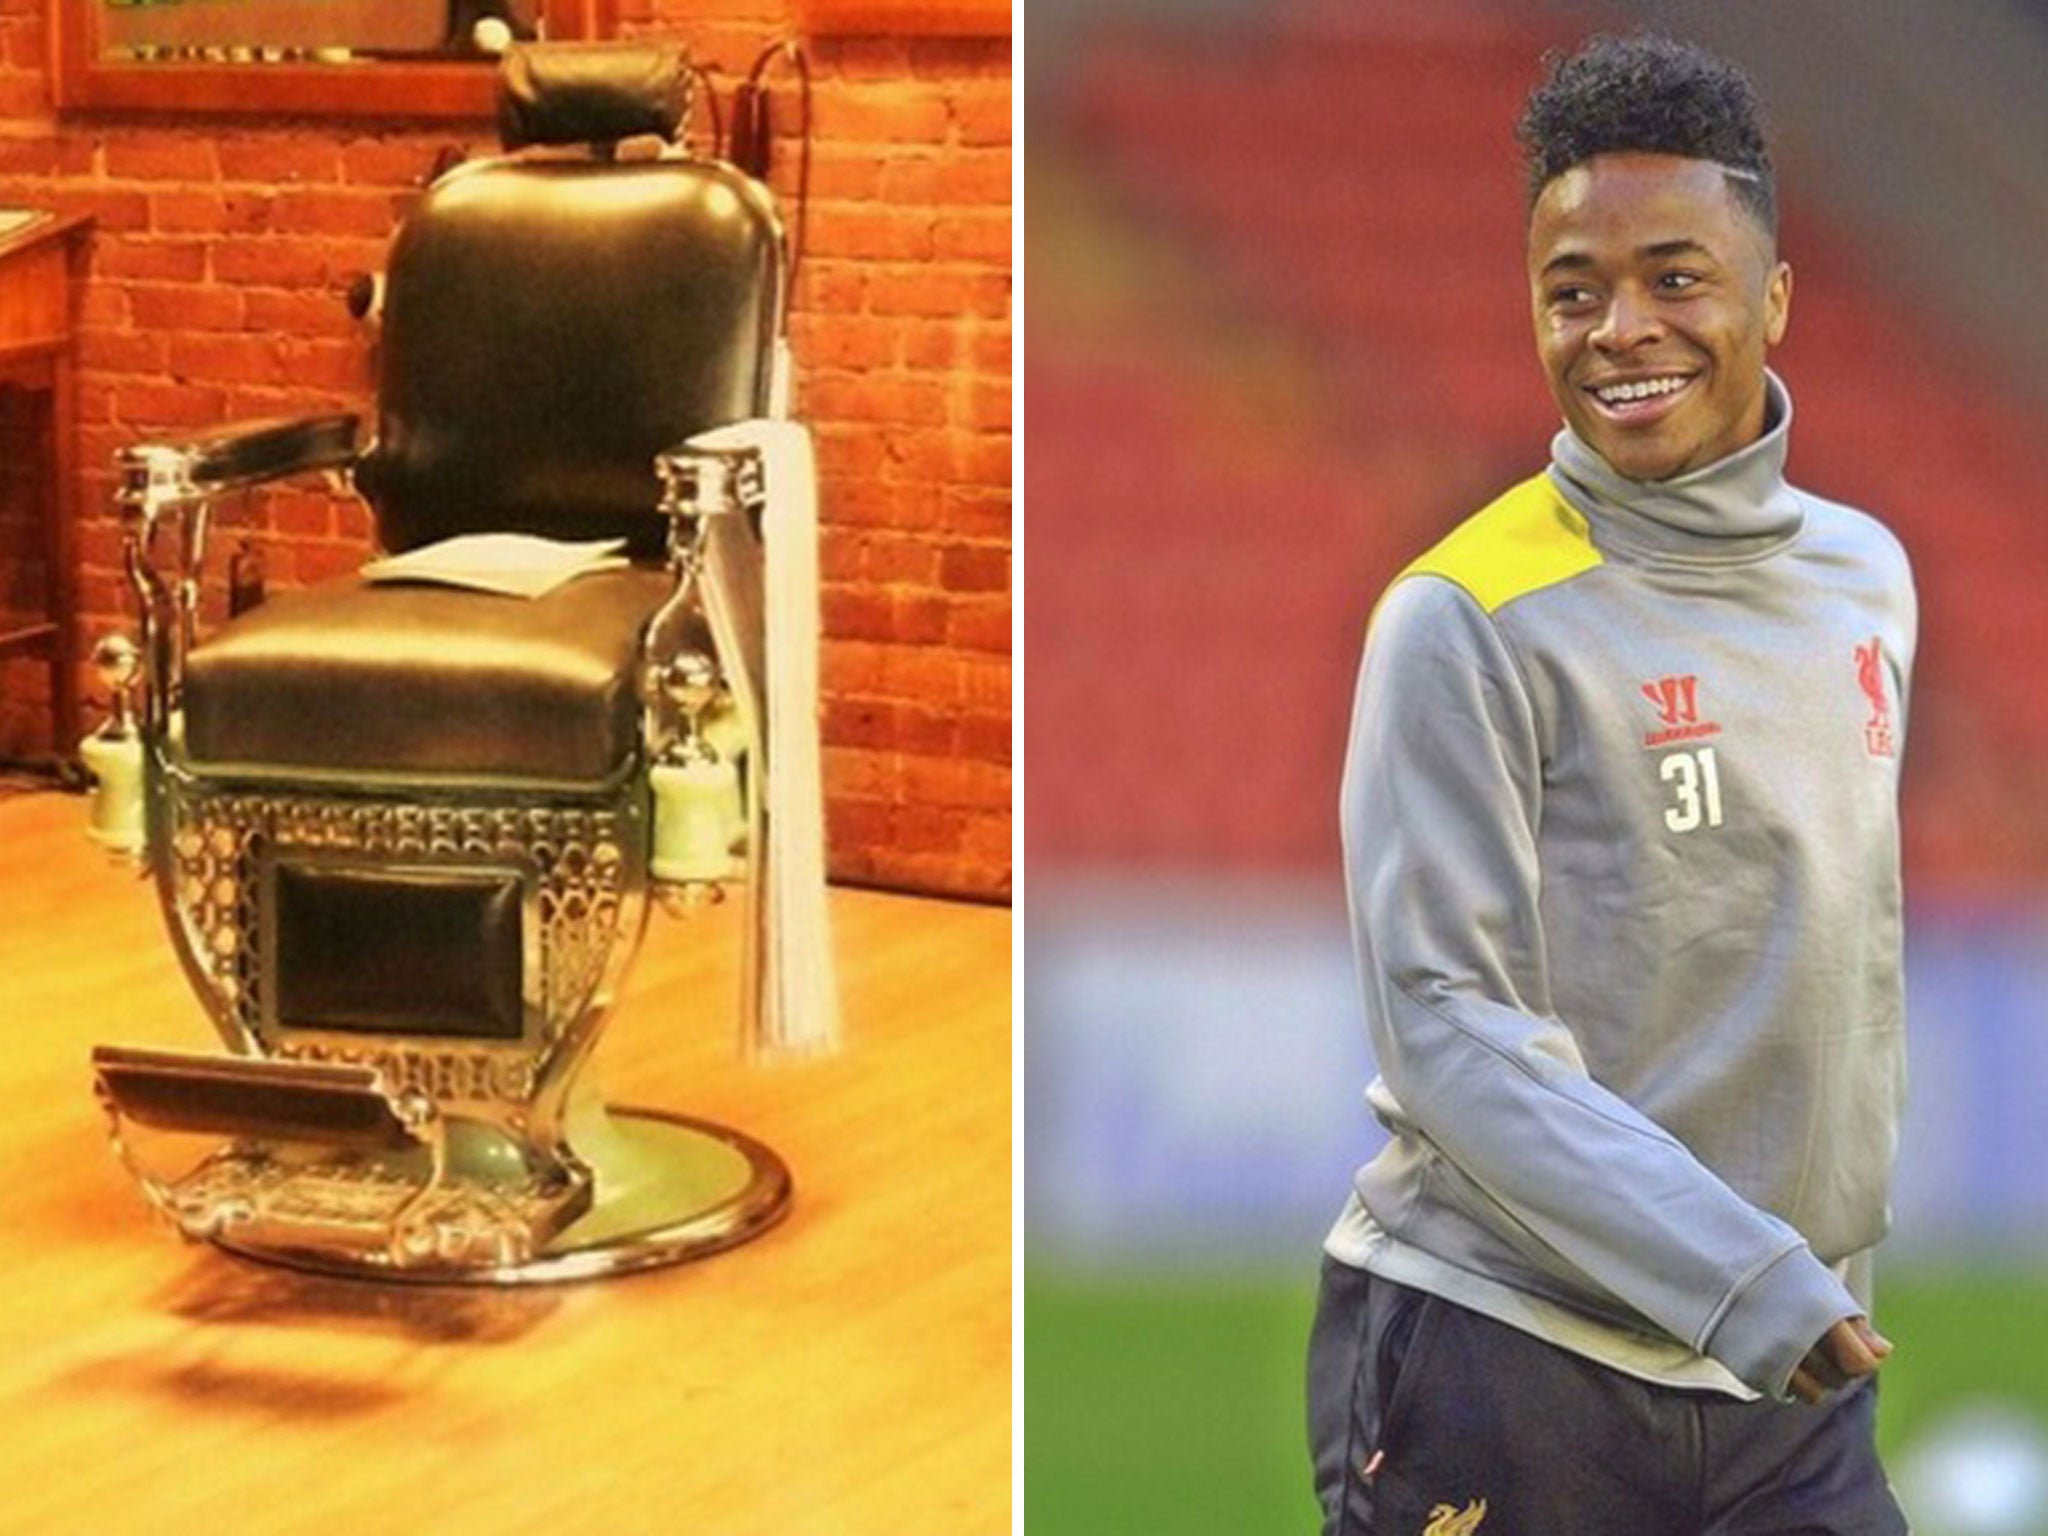 Raheem Sterling (right) and a barber shop chair, one of which can be found in his house